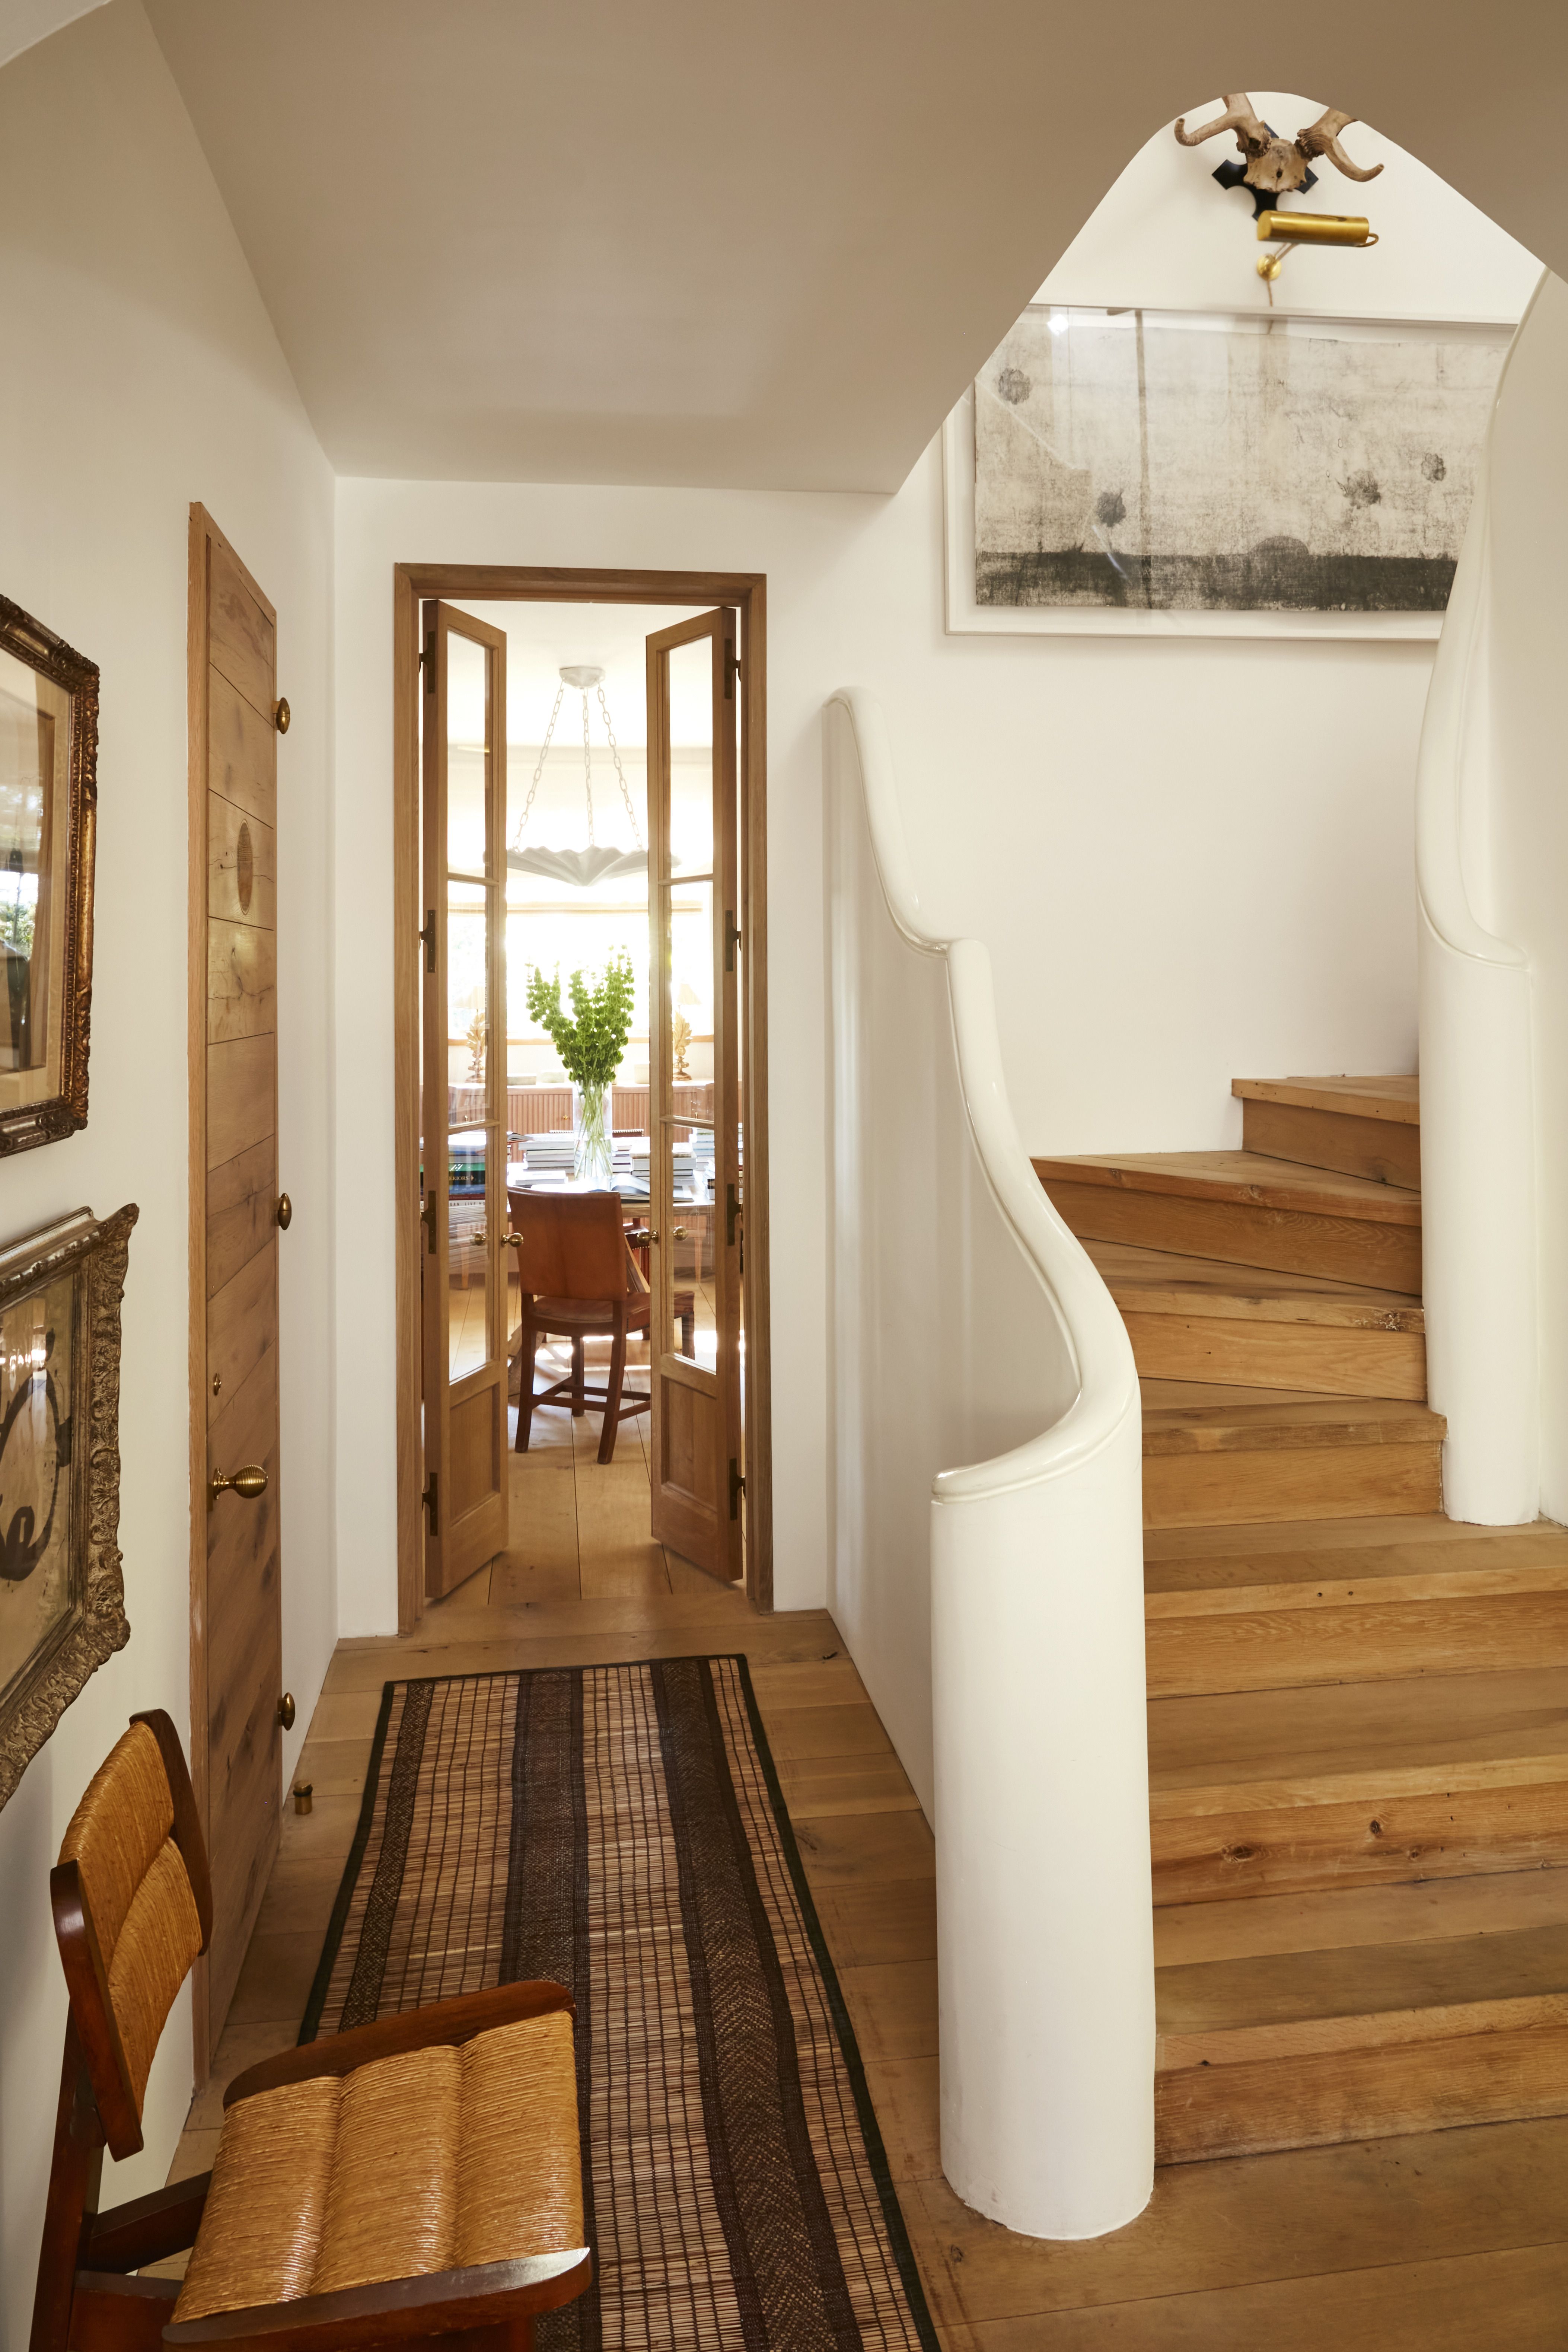 15 staircase ideas to take your home to the next step of style